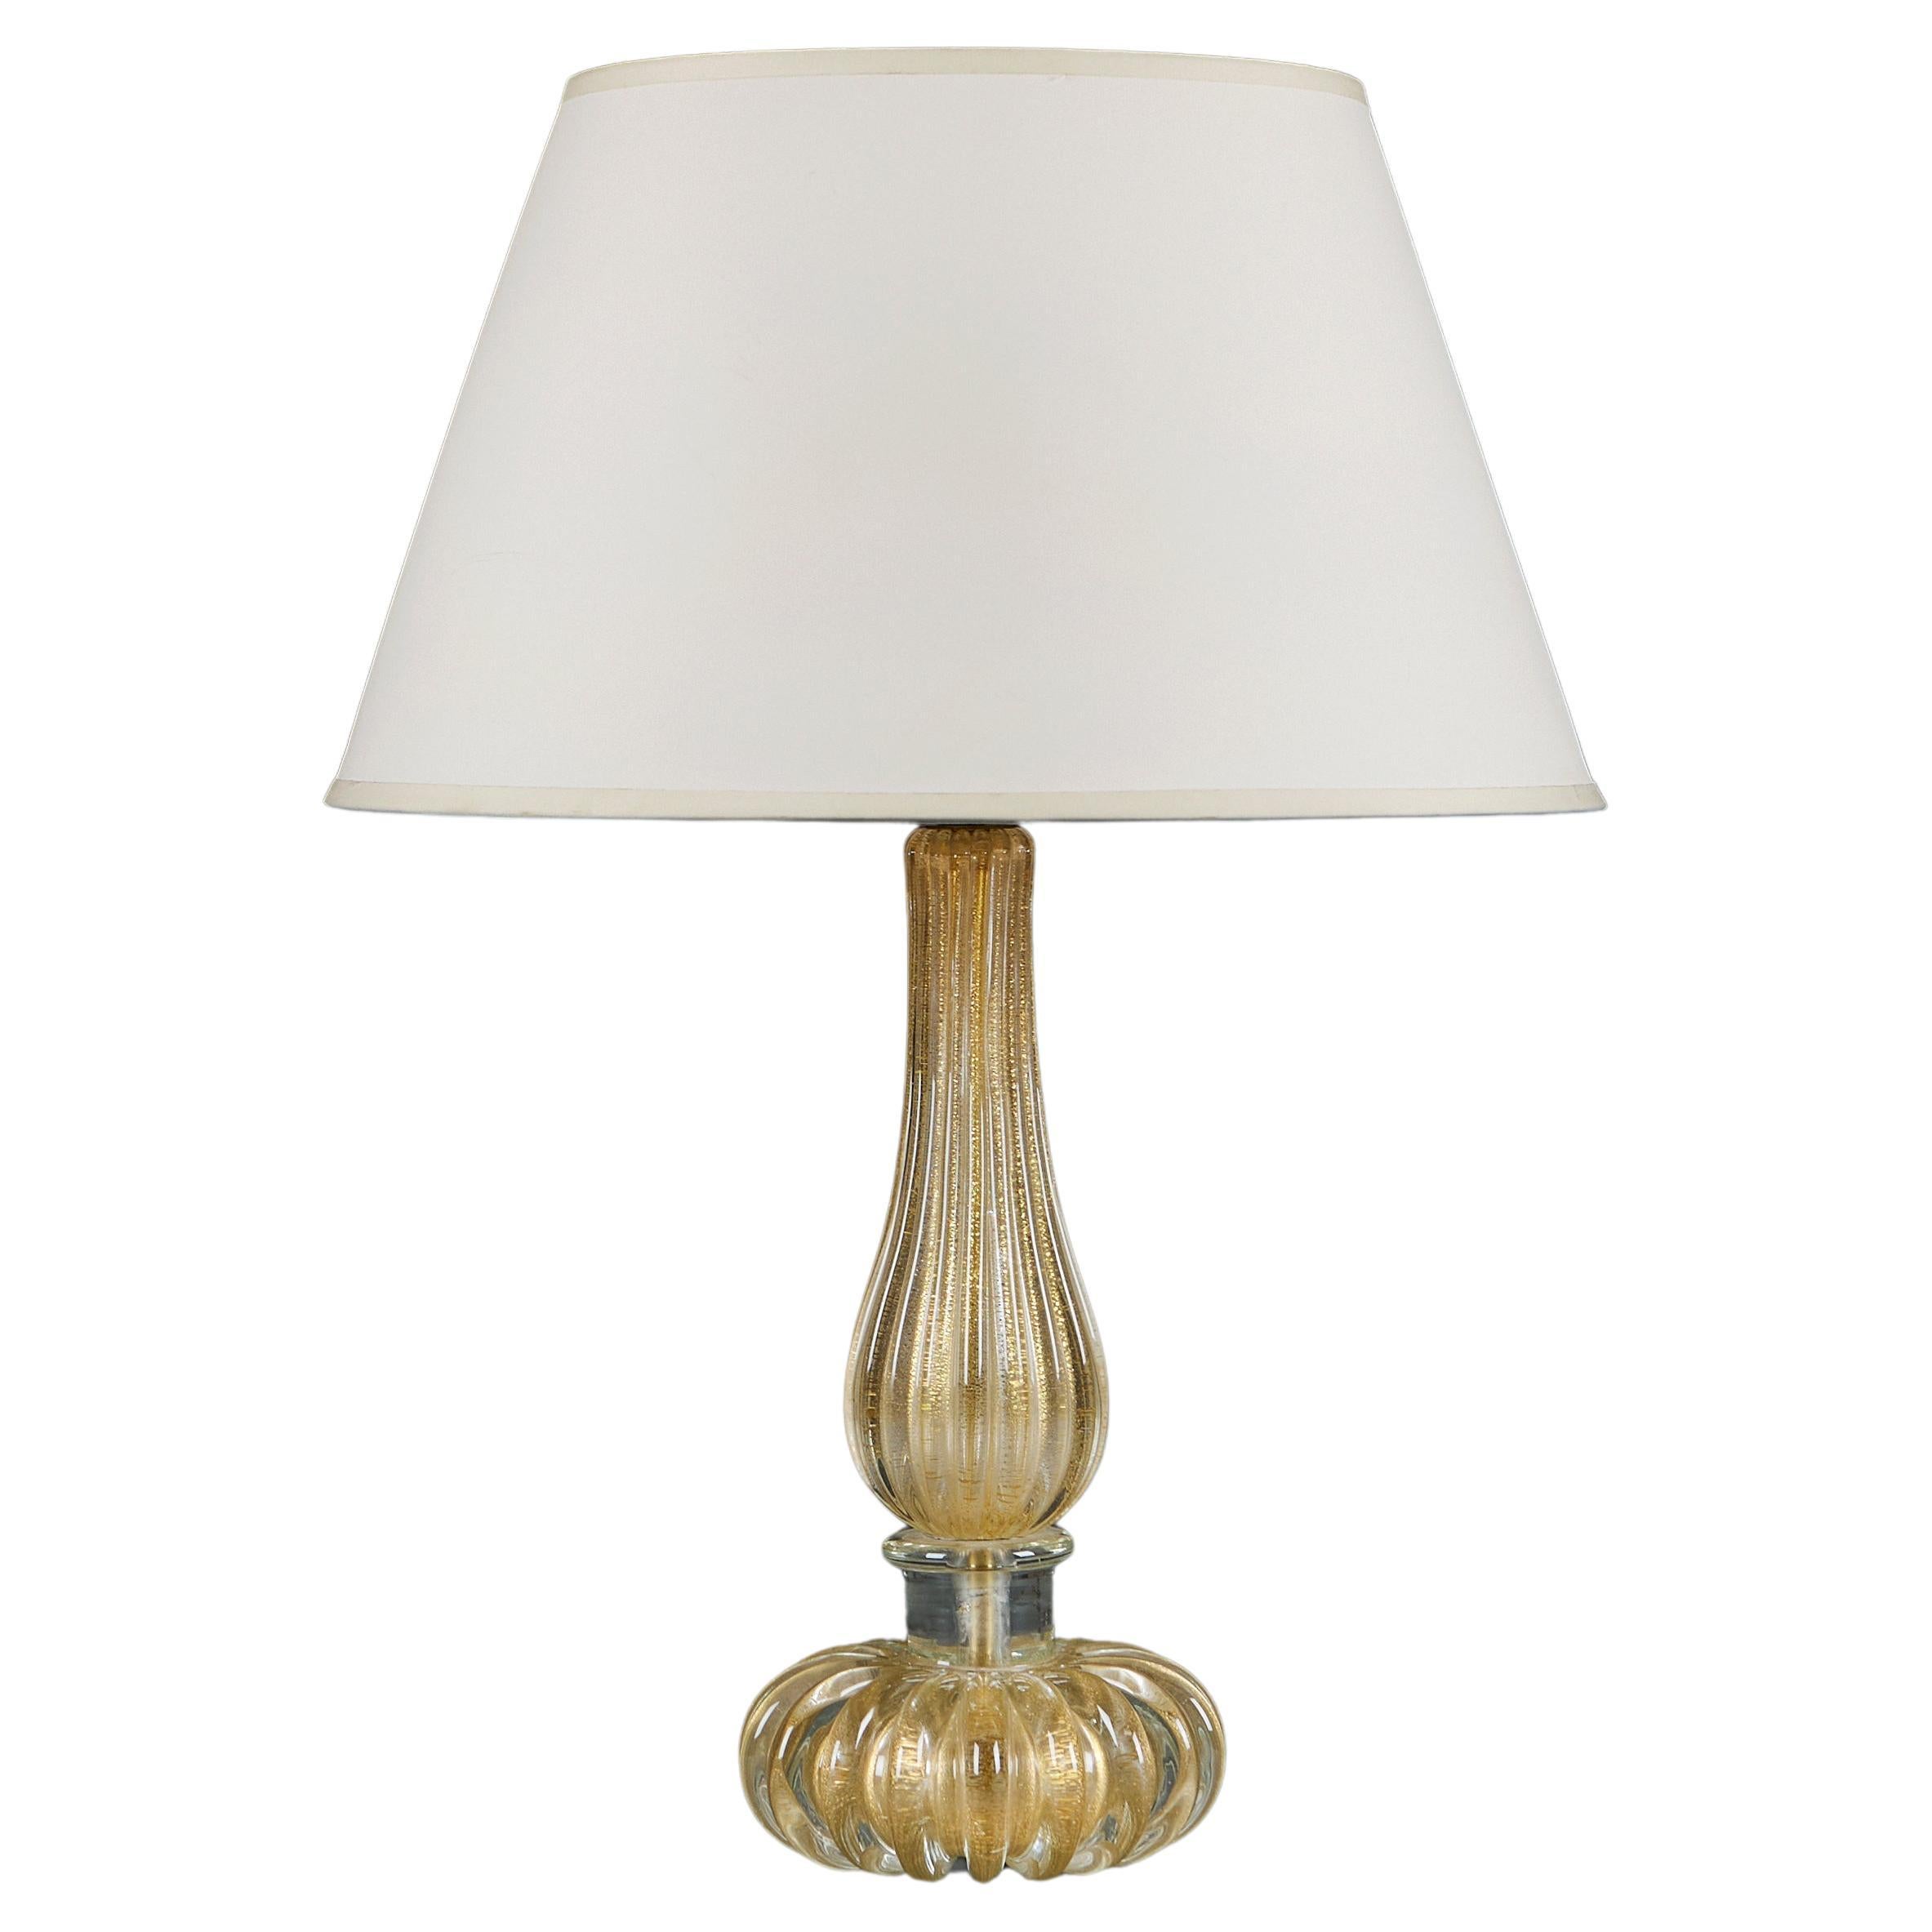 A Midcentury Gold Murano Glass Lamp by Seguso